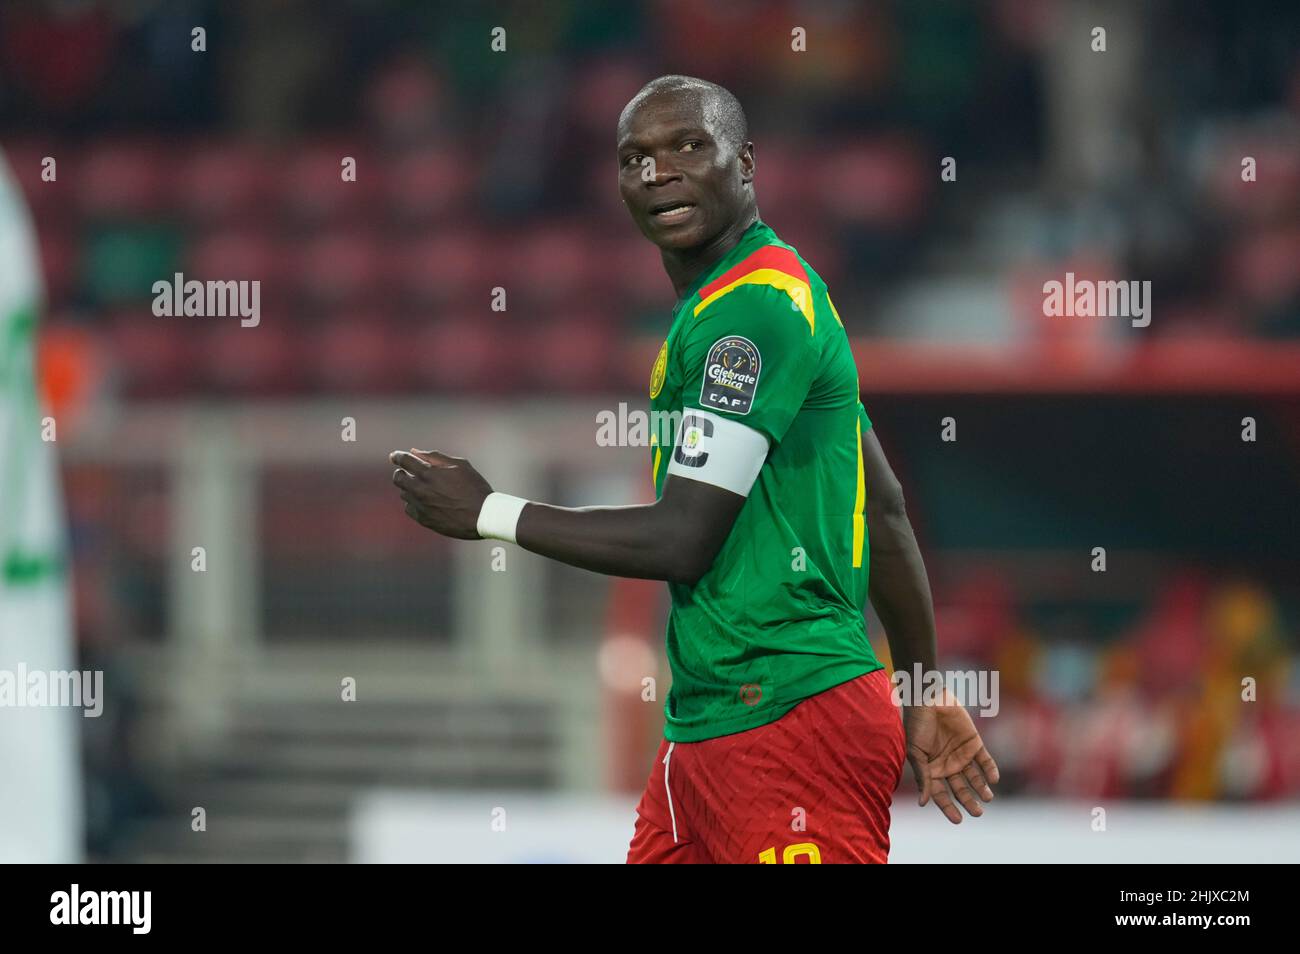 Yaounde, Cameroon, January, 24, 2022: Vincent Aboubakar of Cameroon during Cameroun versus Comoros - Africa Cup of Nations at Olembe stadium. Kim Price/CSM. Stock Photo